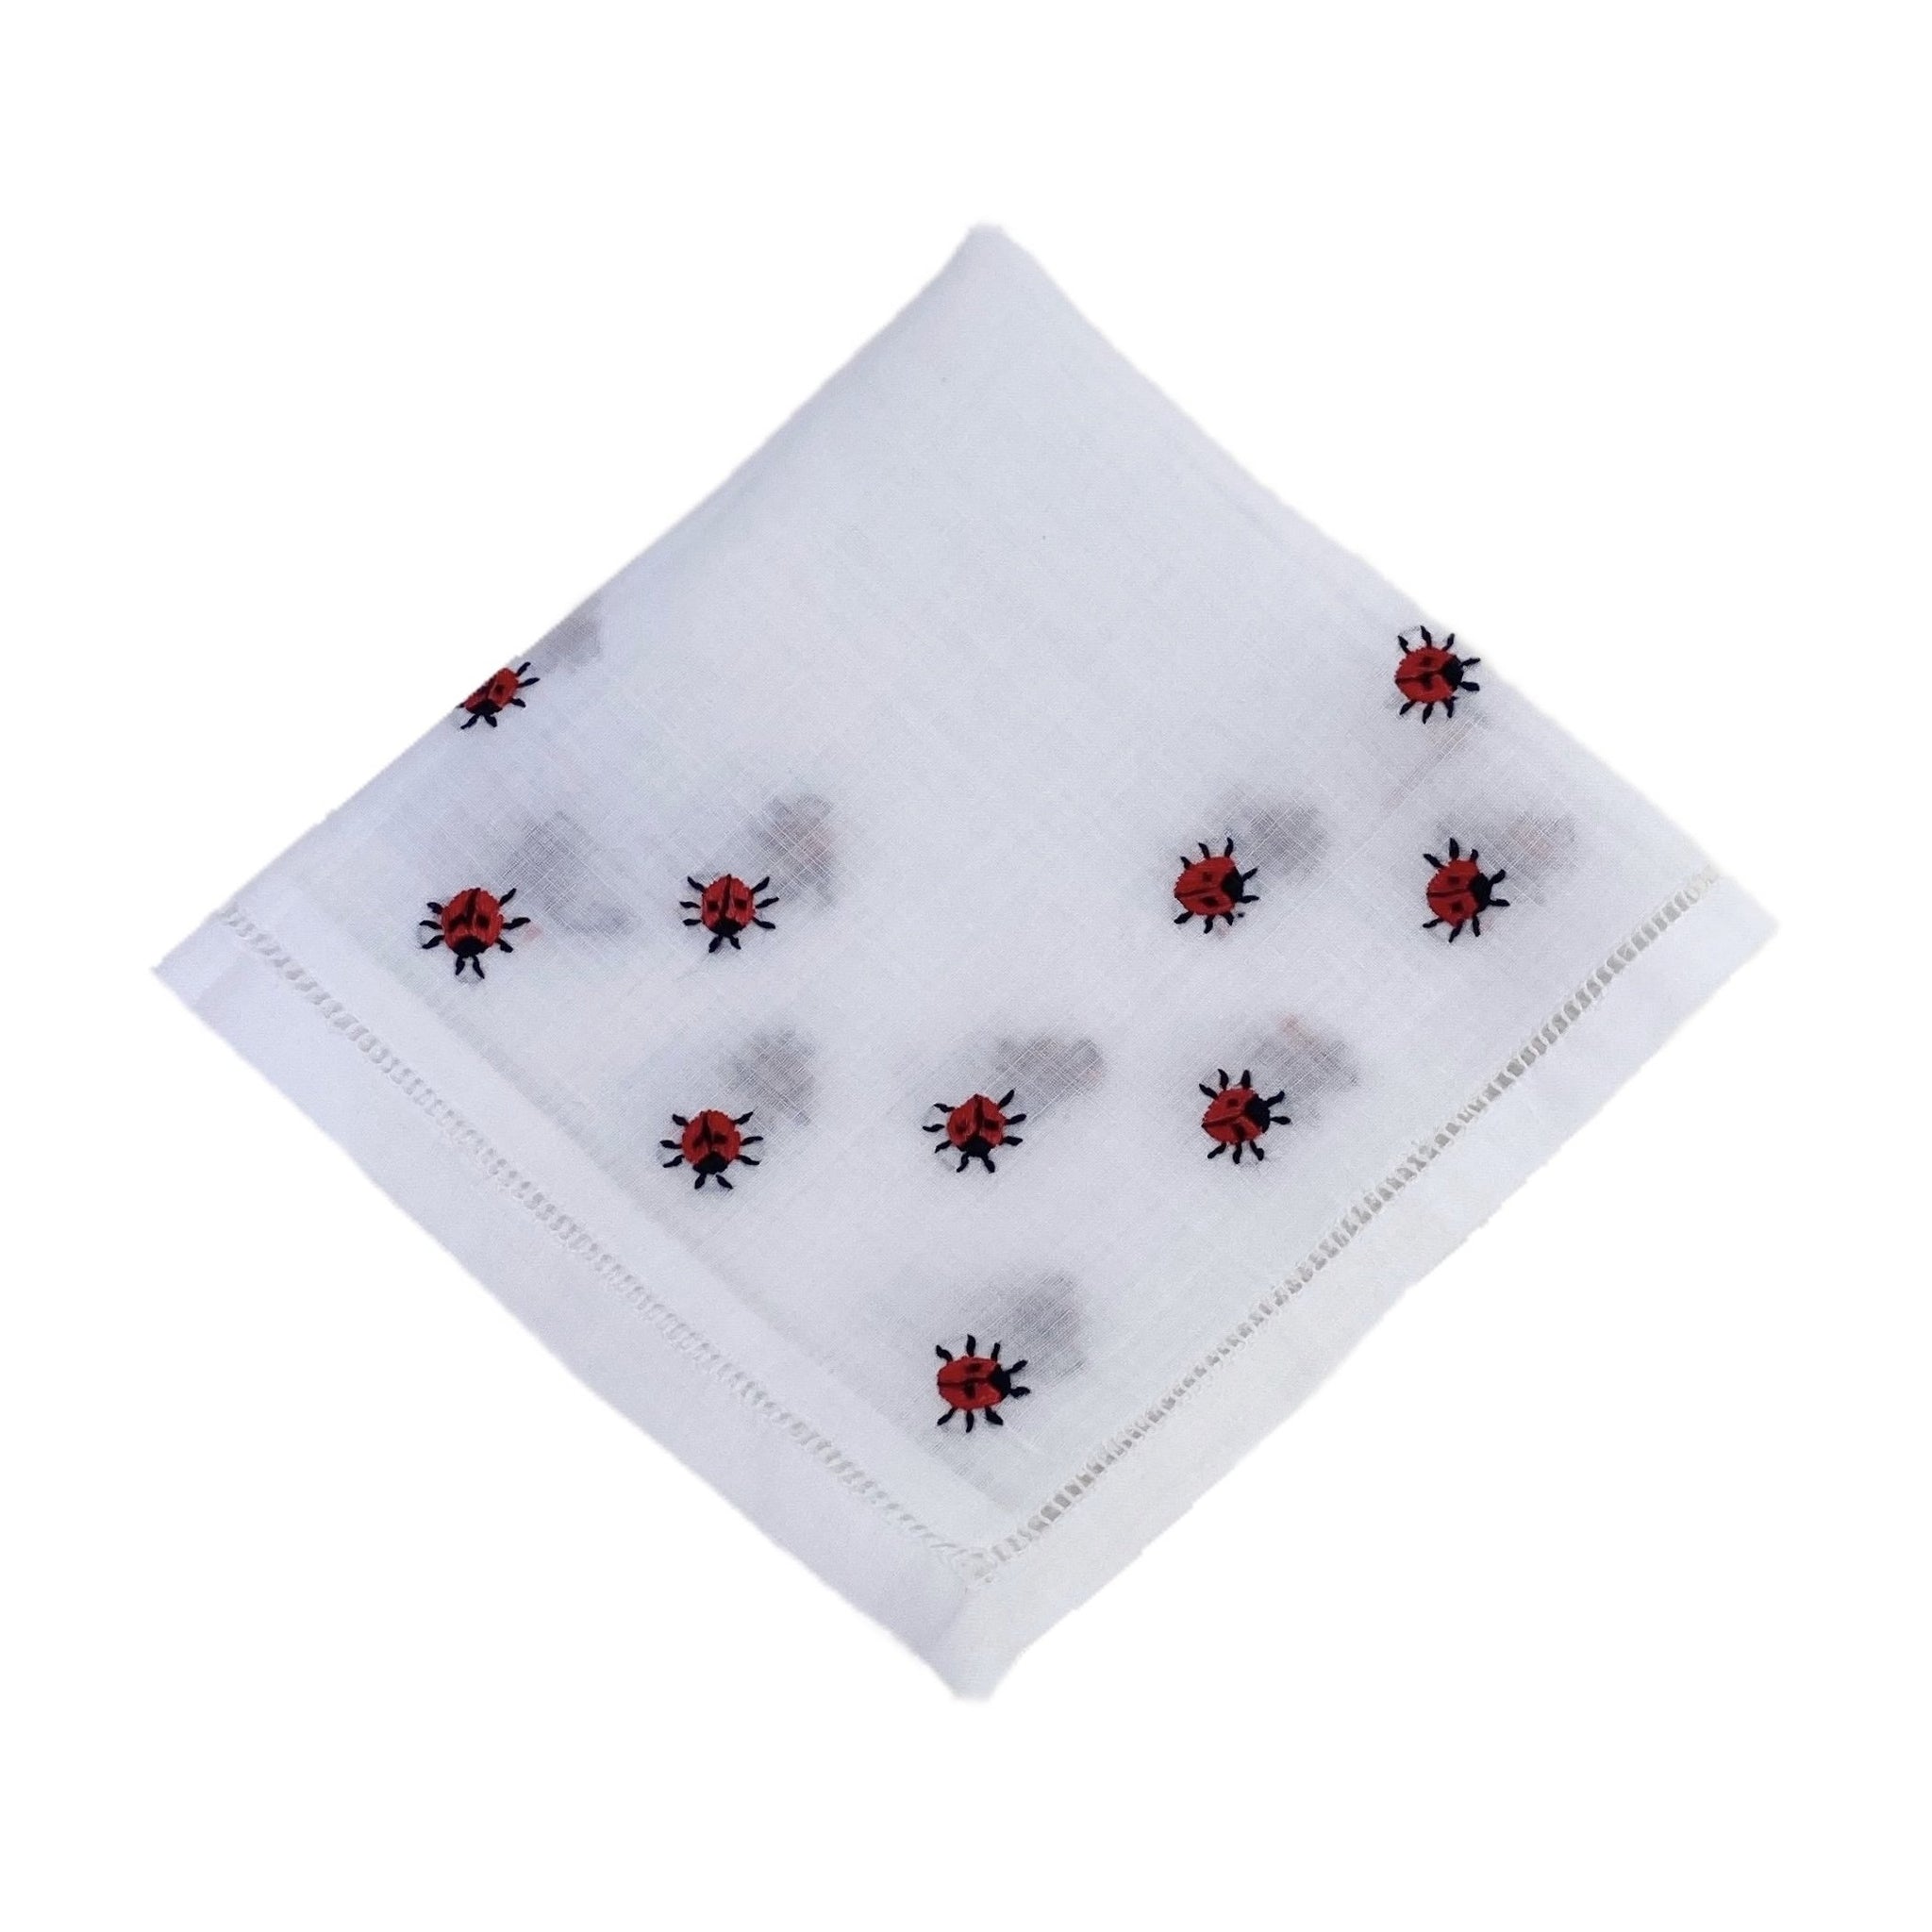 Lady Bug Embroidered Linen Hankie